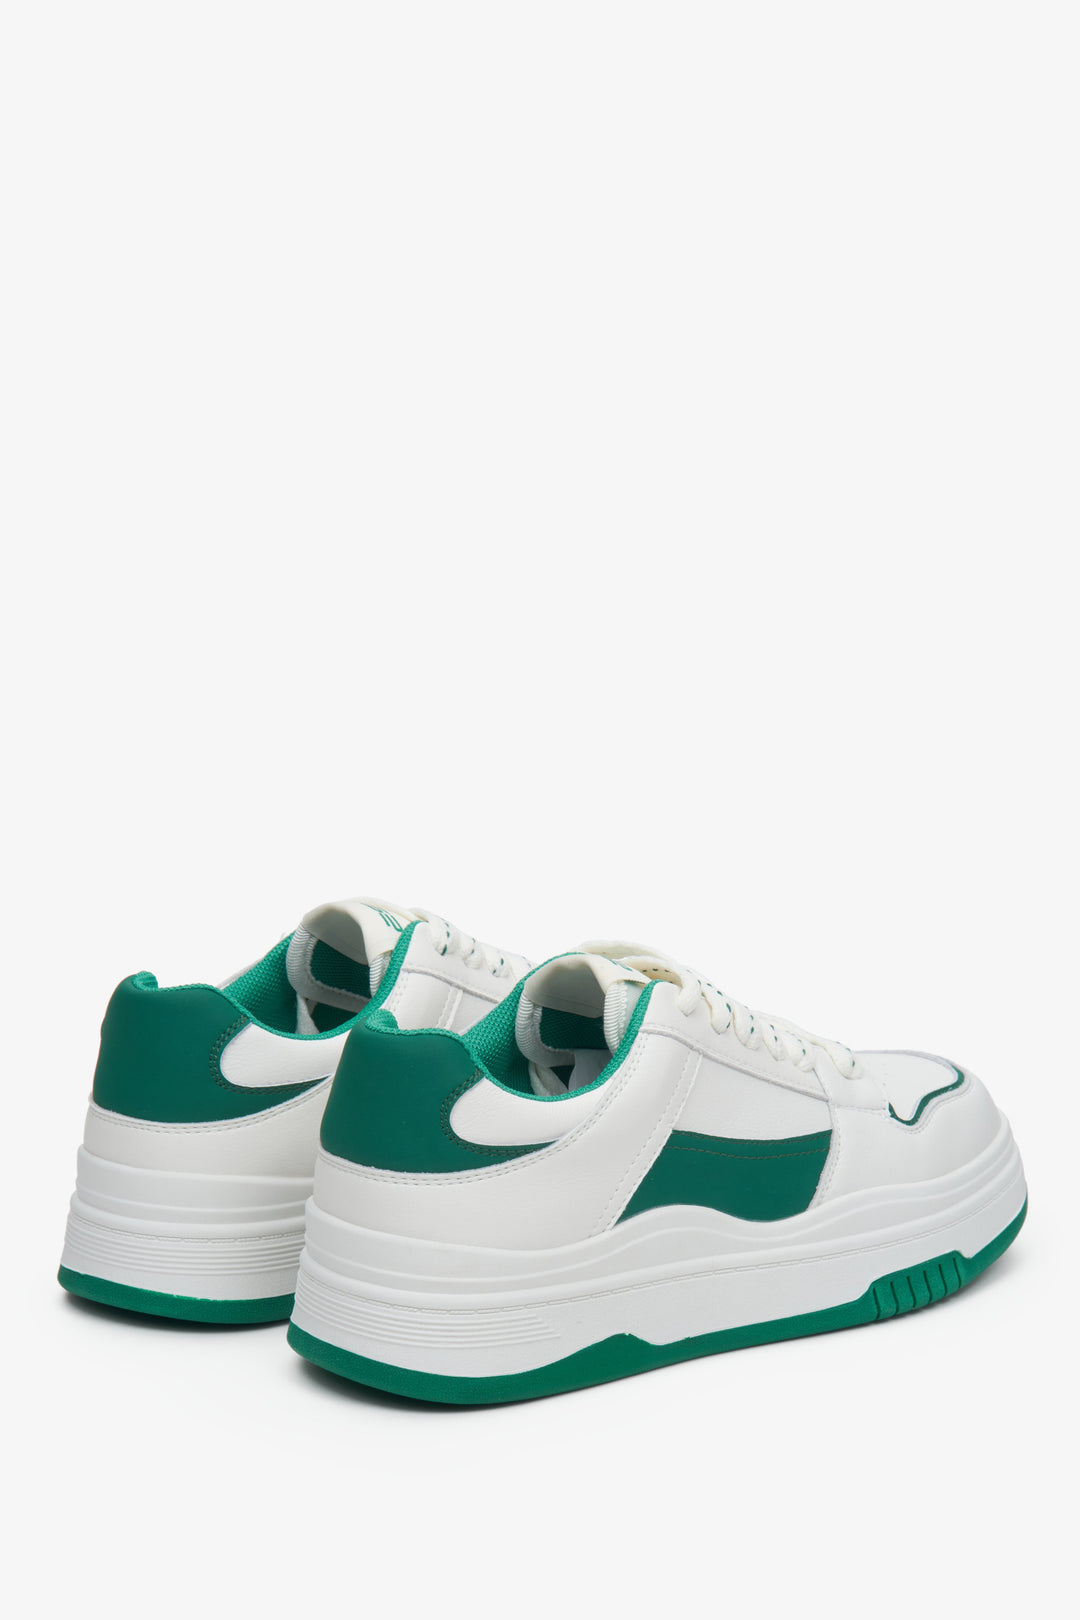 Women's green and white sneakers made of leather.